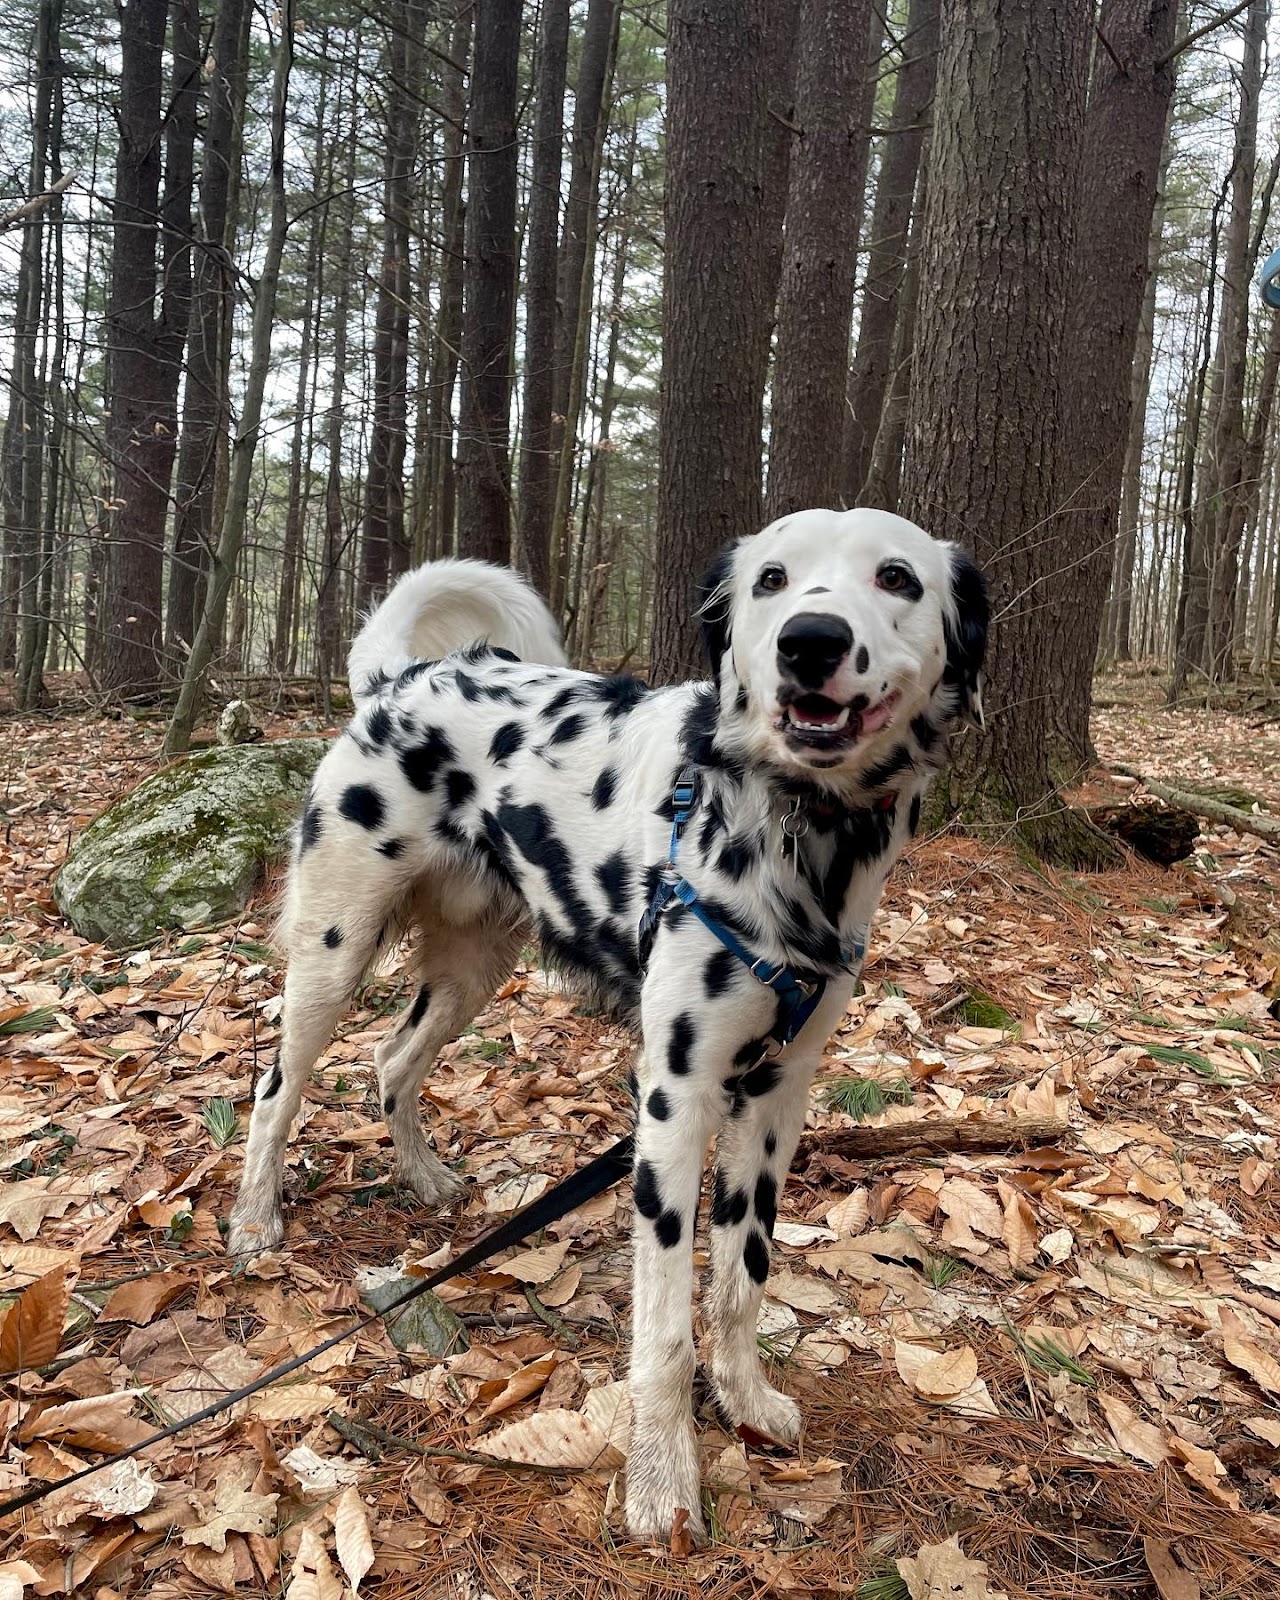 A long-haired dalmatians